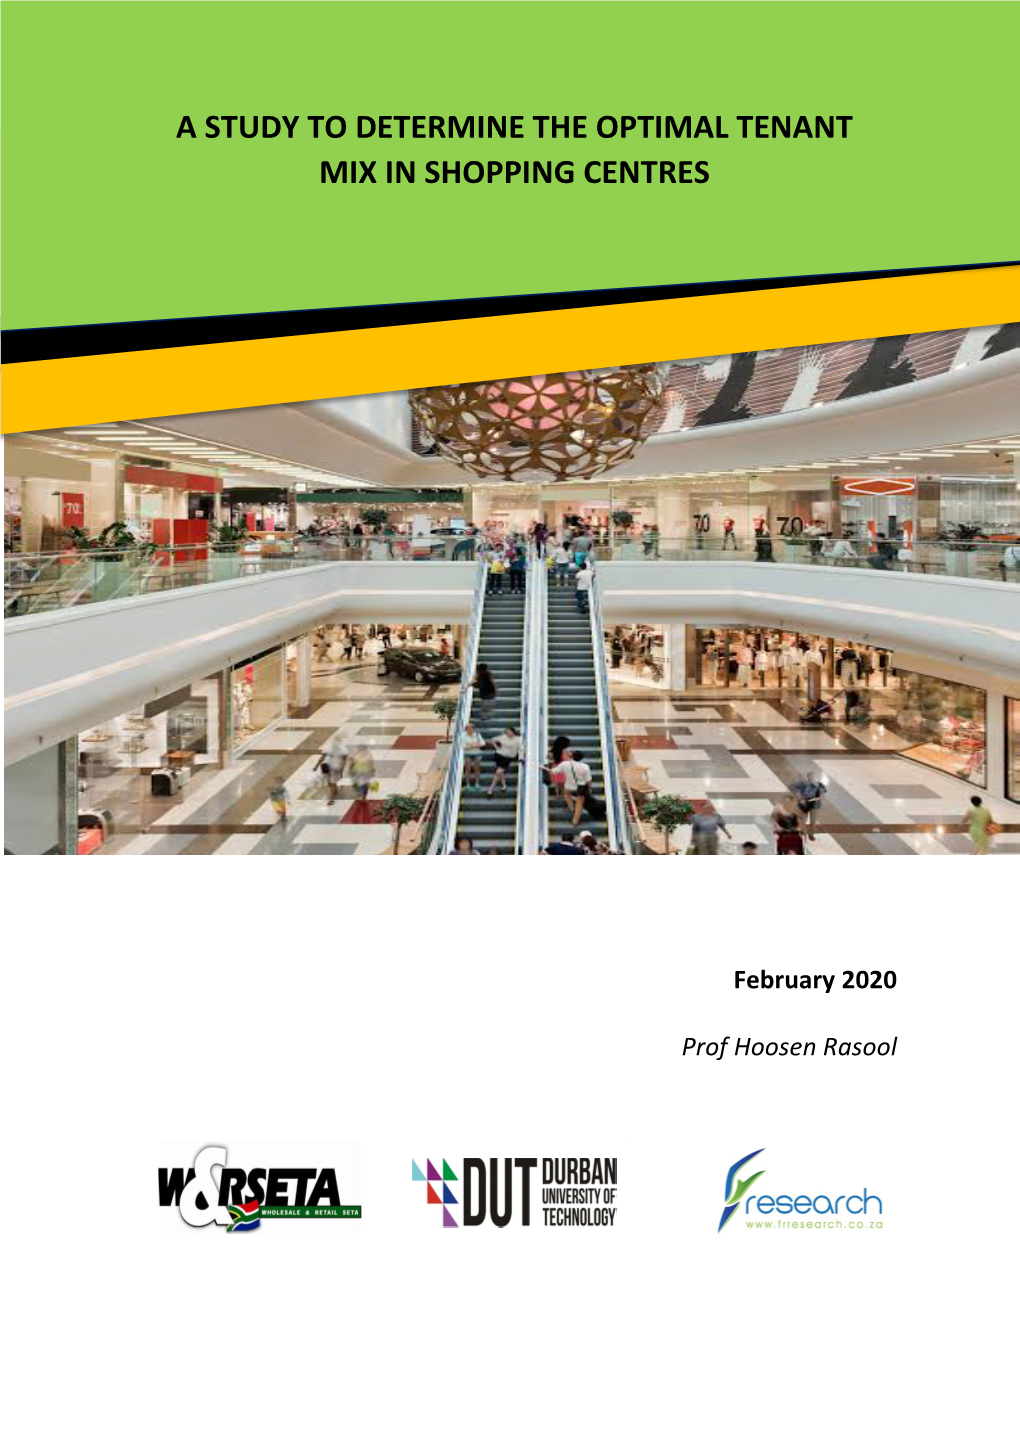 A Study to Determine the Optimal Tenant Mix in Shopping Centres